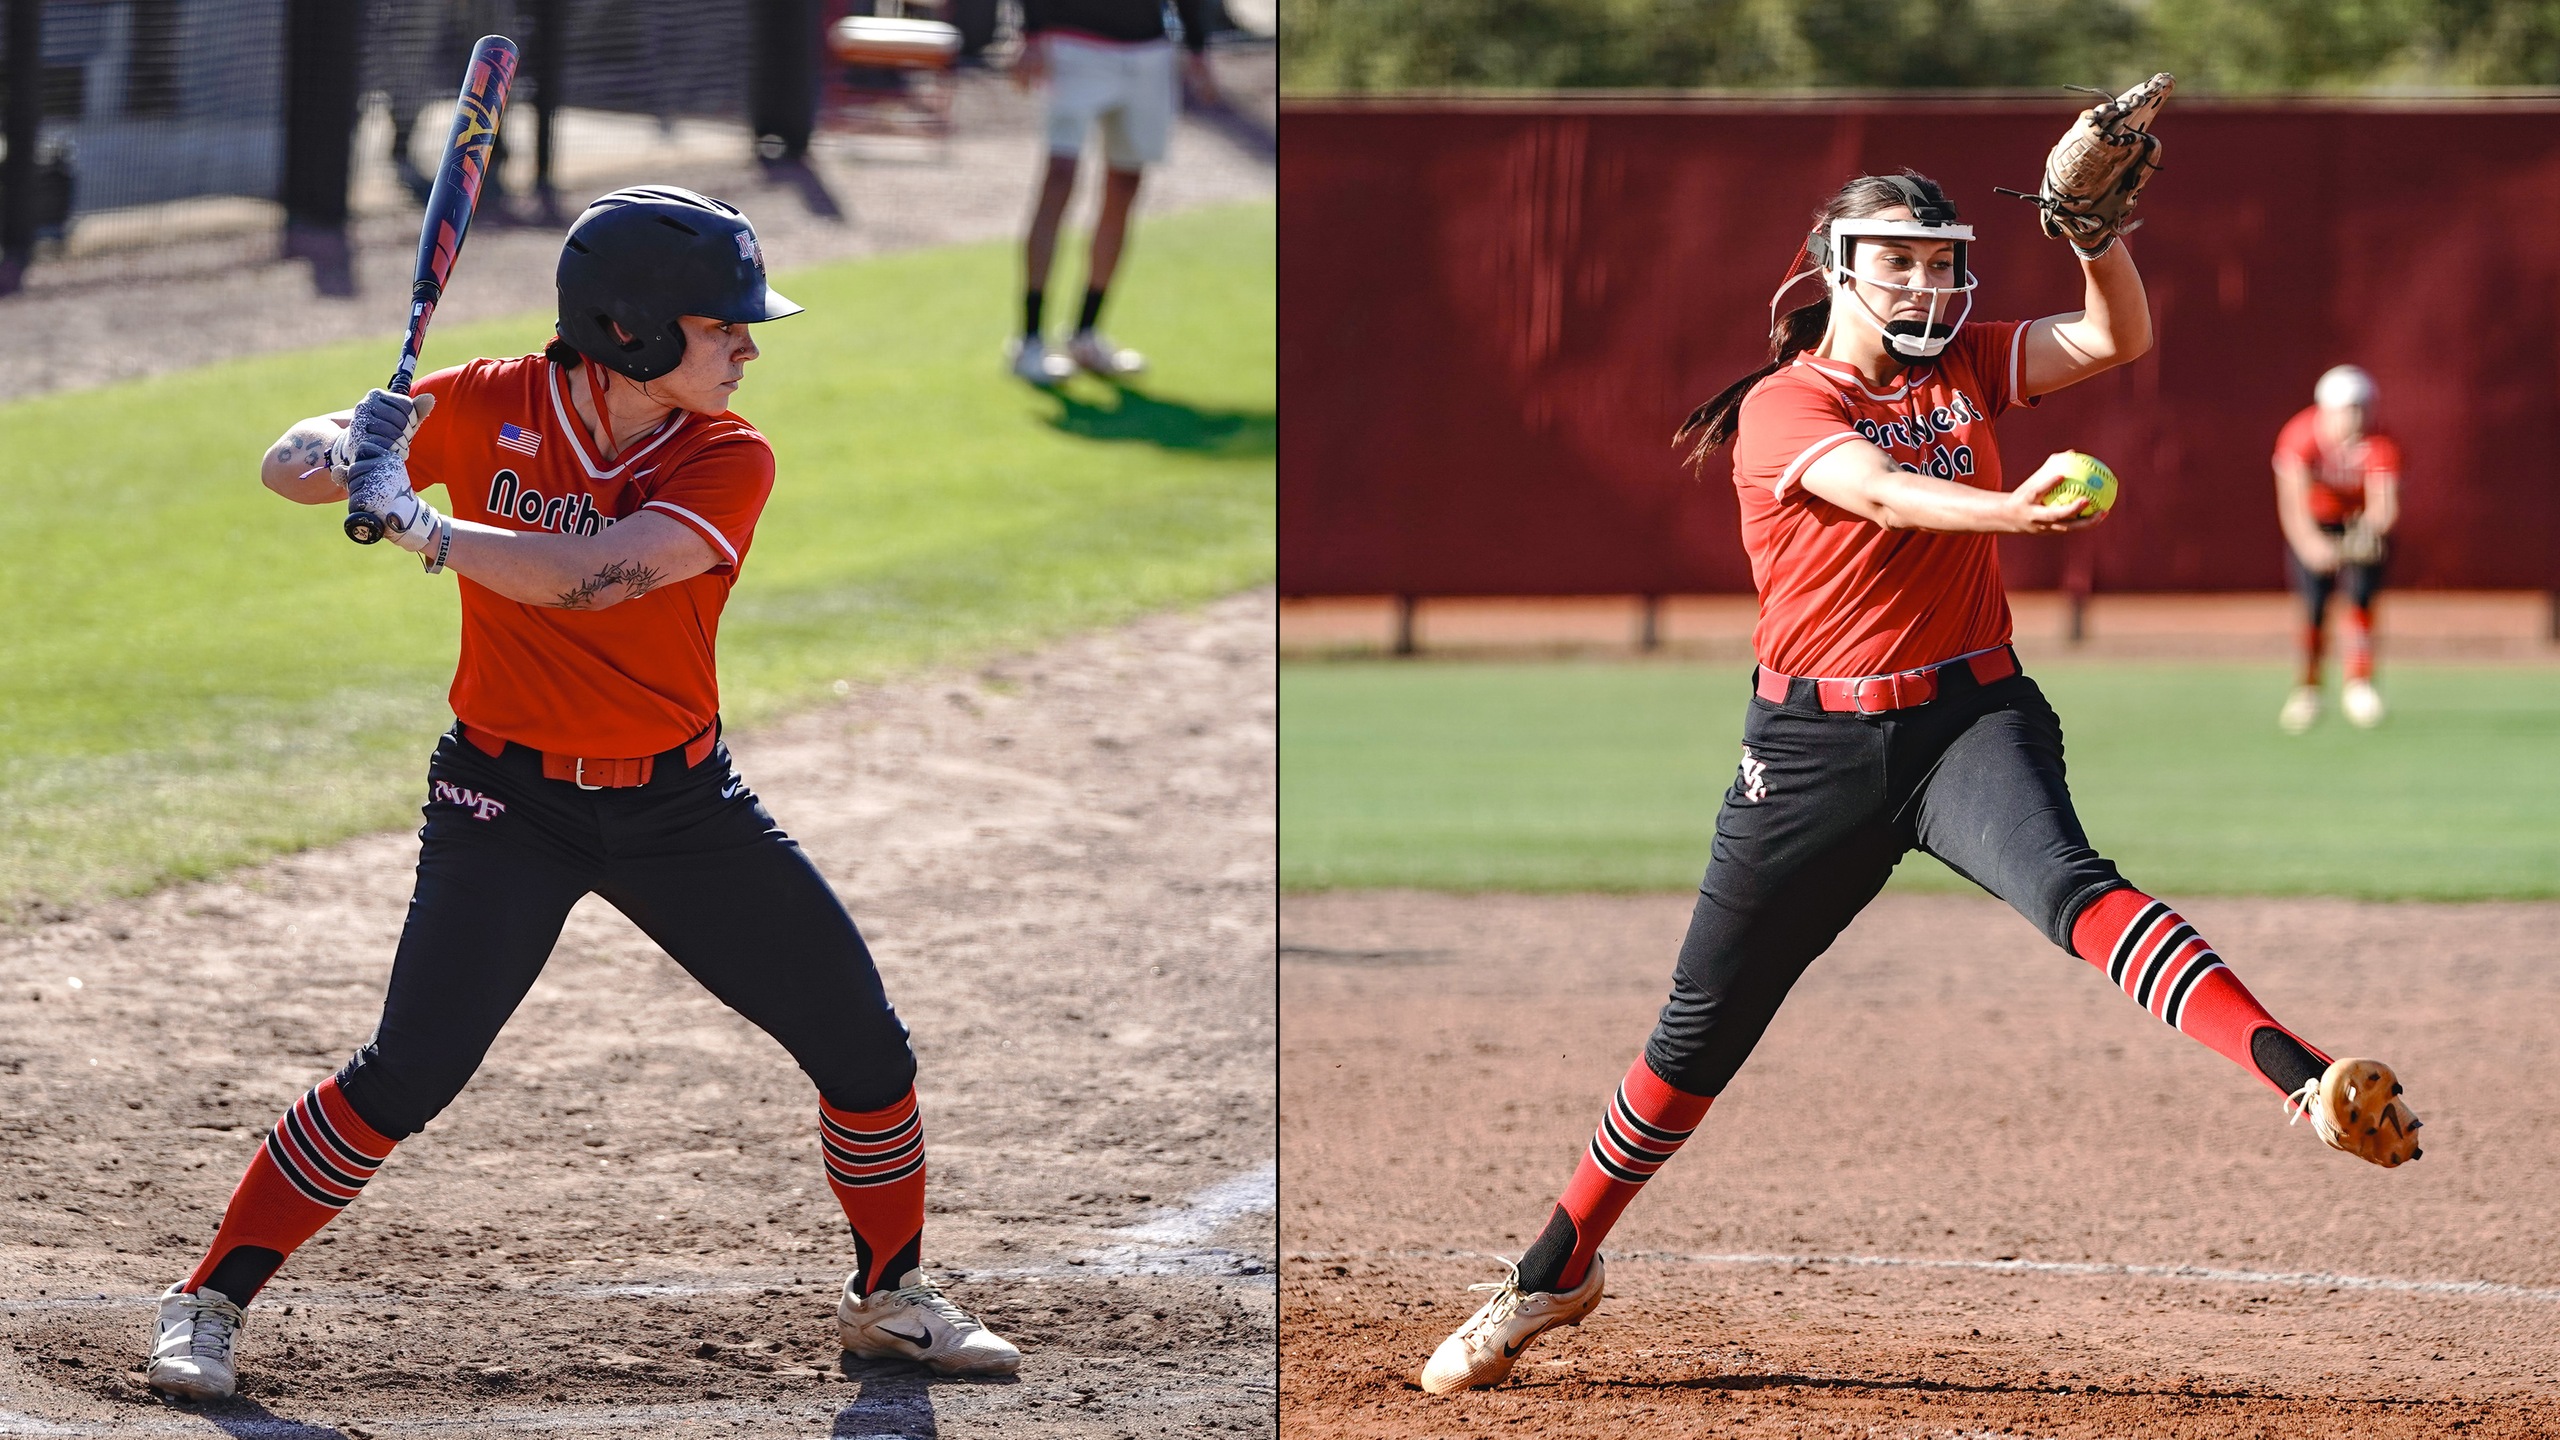 Mason Named Player of the Week, Heyl Named Pitcher of the Week